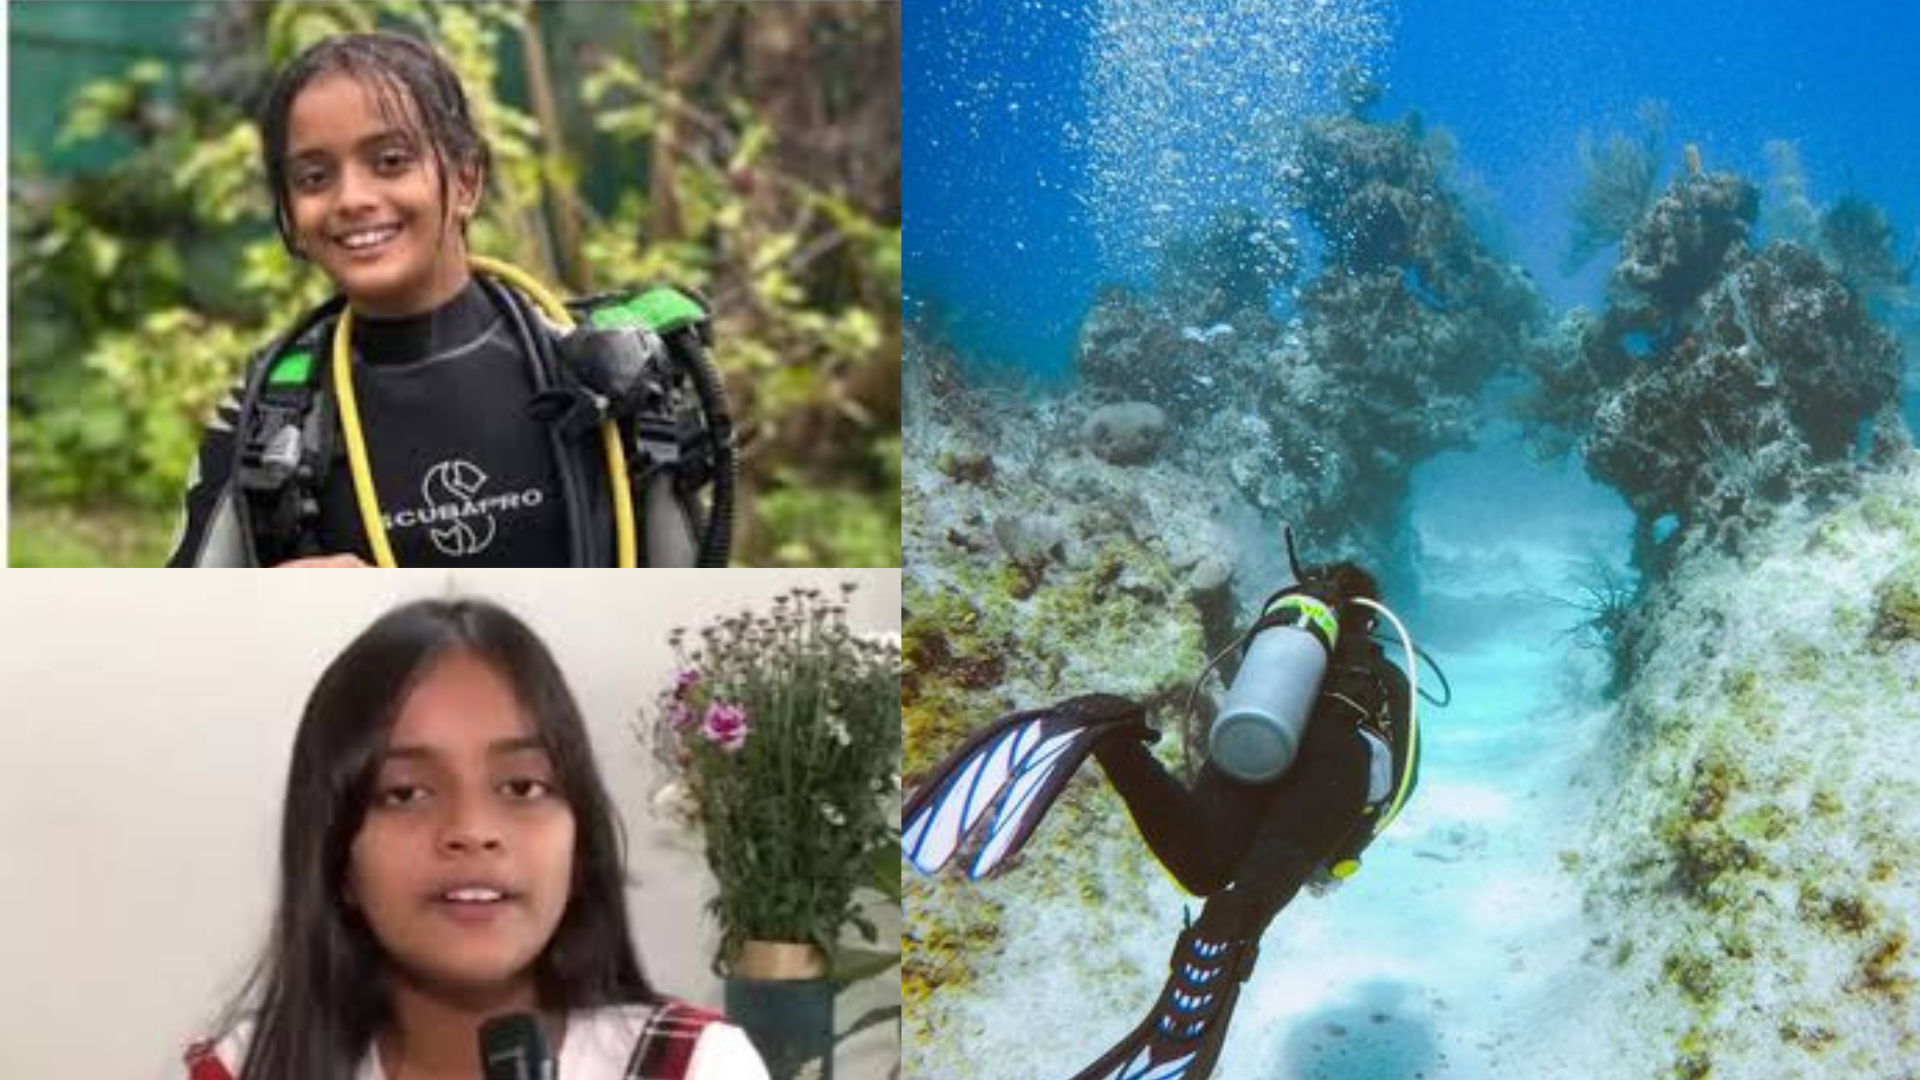 Kyna Khare Girl Sets Record: World's Youngest Female Master Scuba Diver